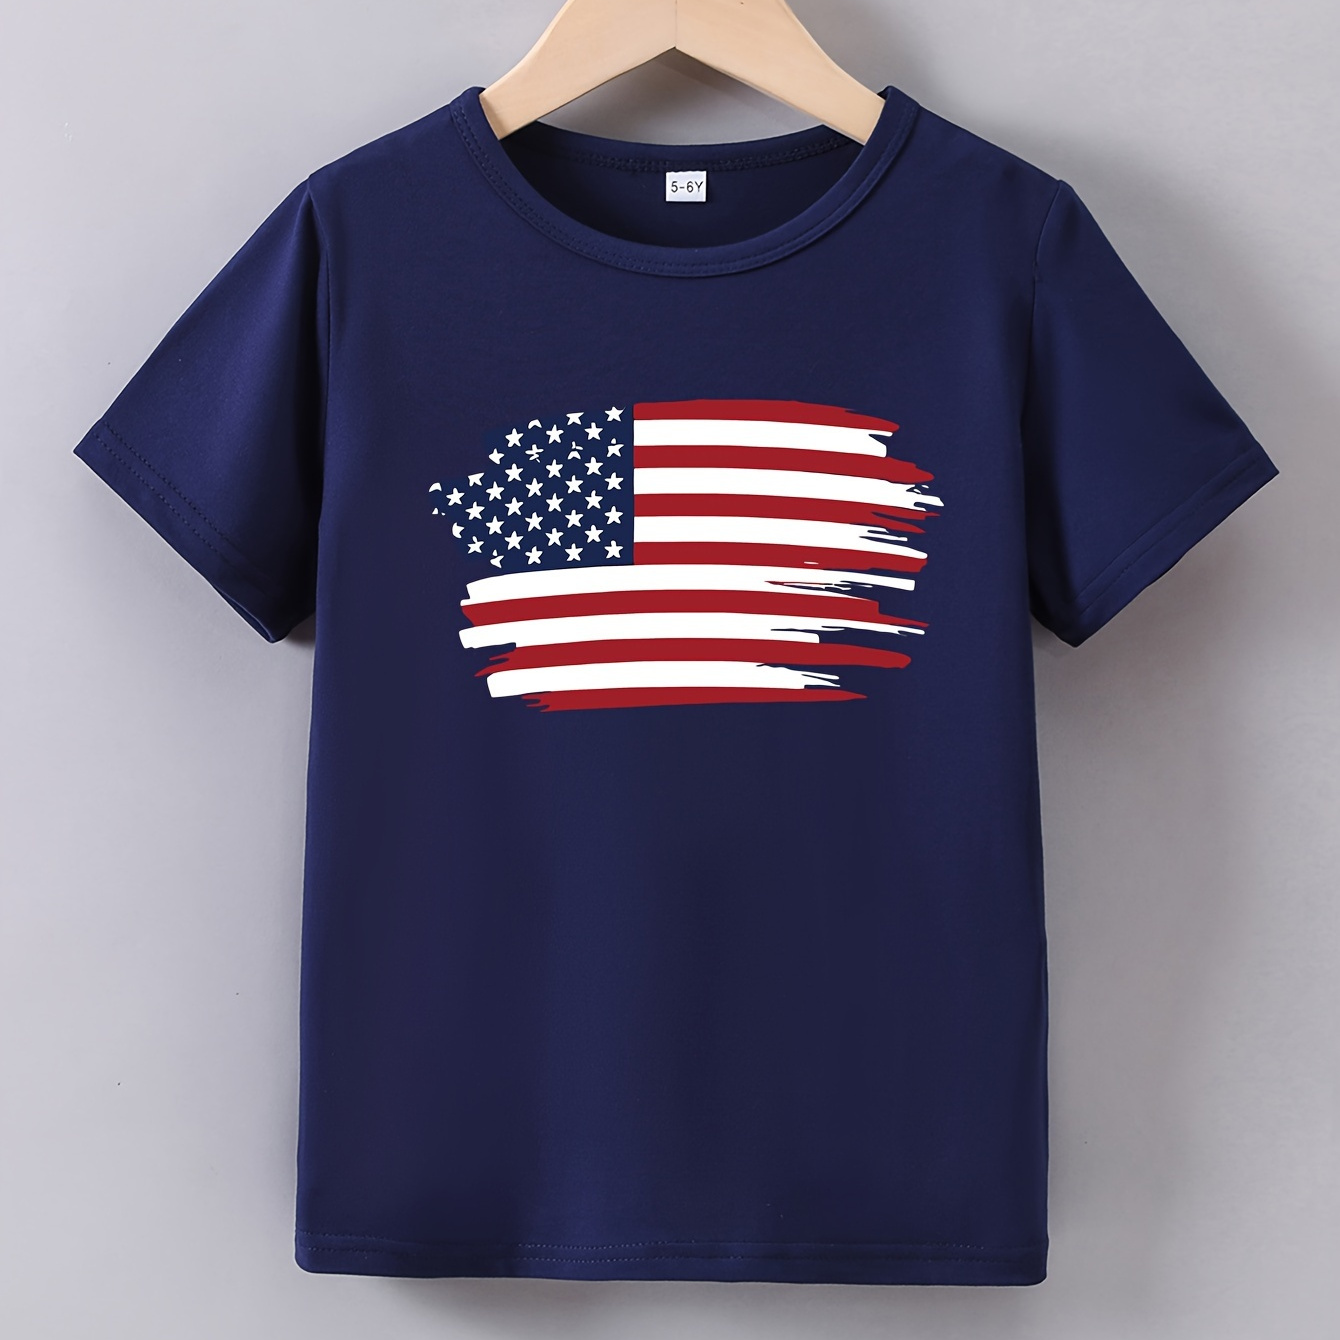 

Boys Casual T-shirt, Flag Graphic Print Breathable Comfortable Crew Neck Top, Boys Summer Clothing